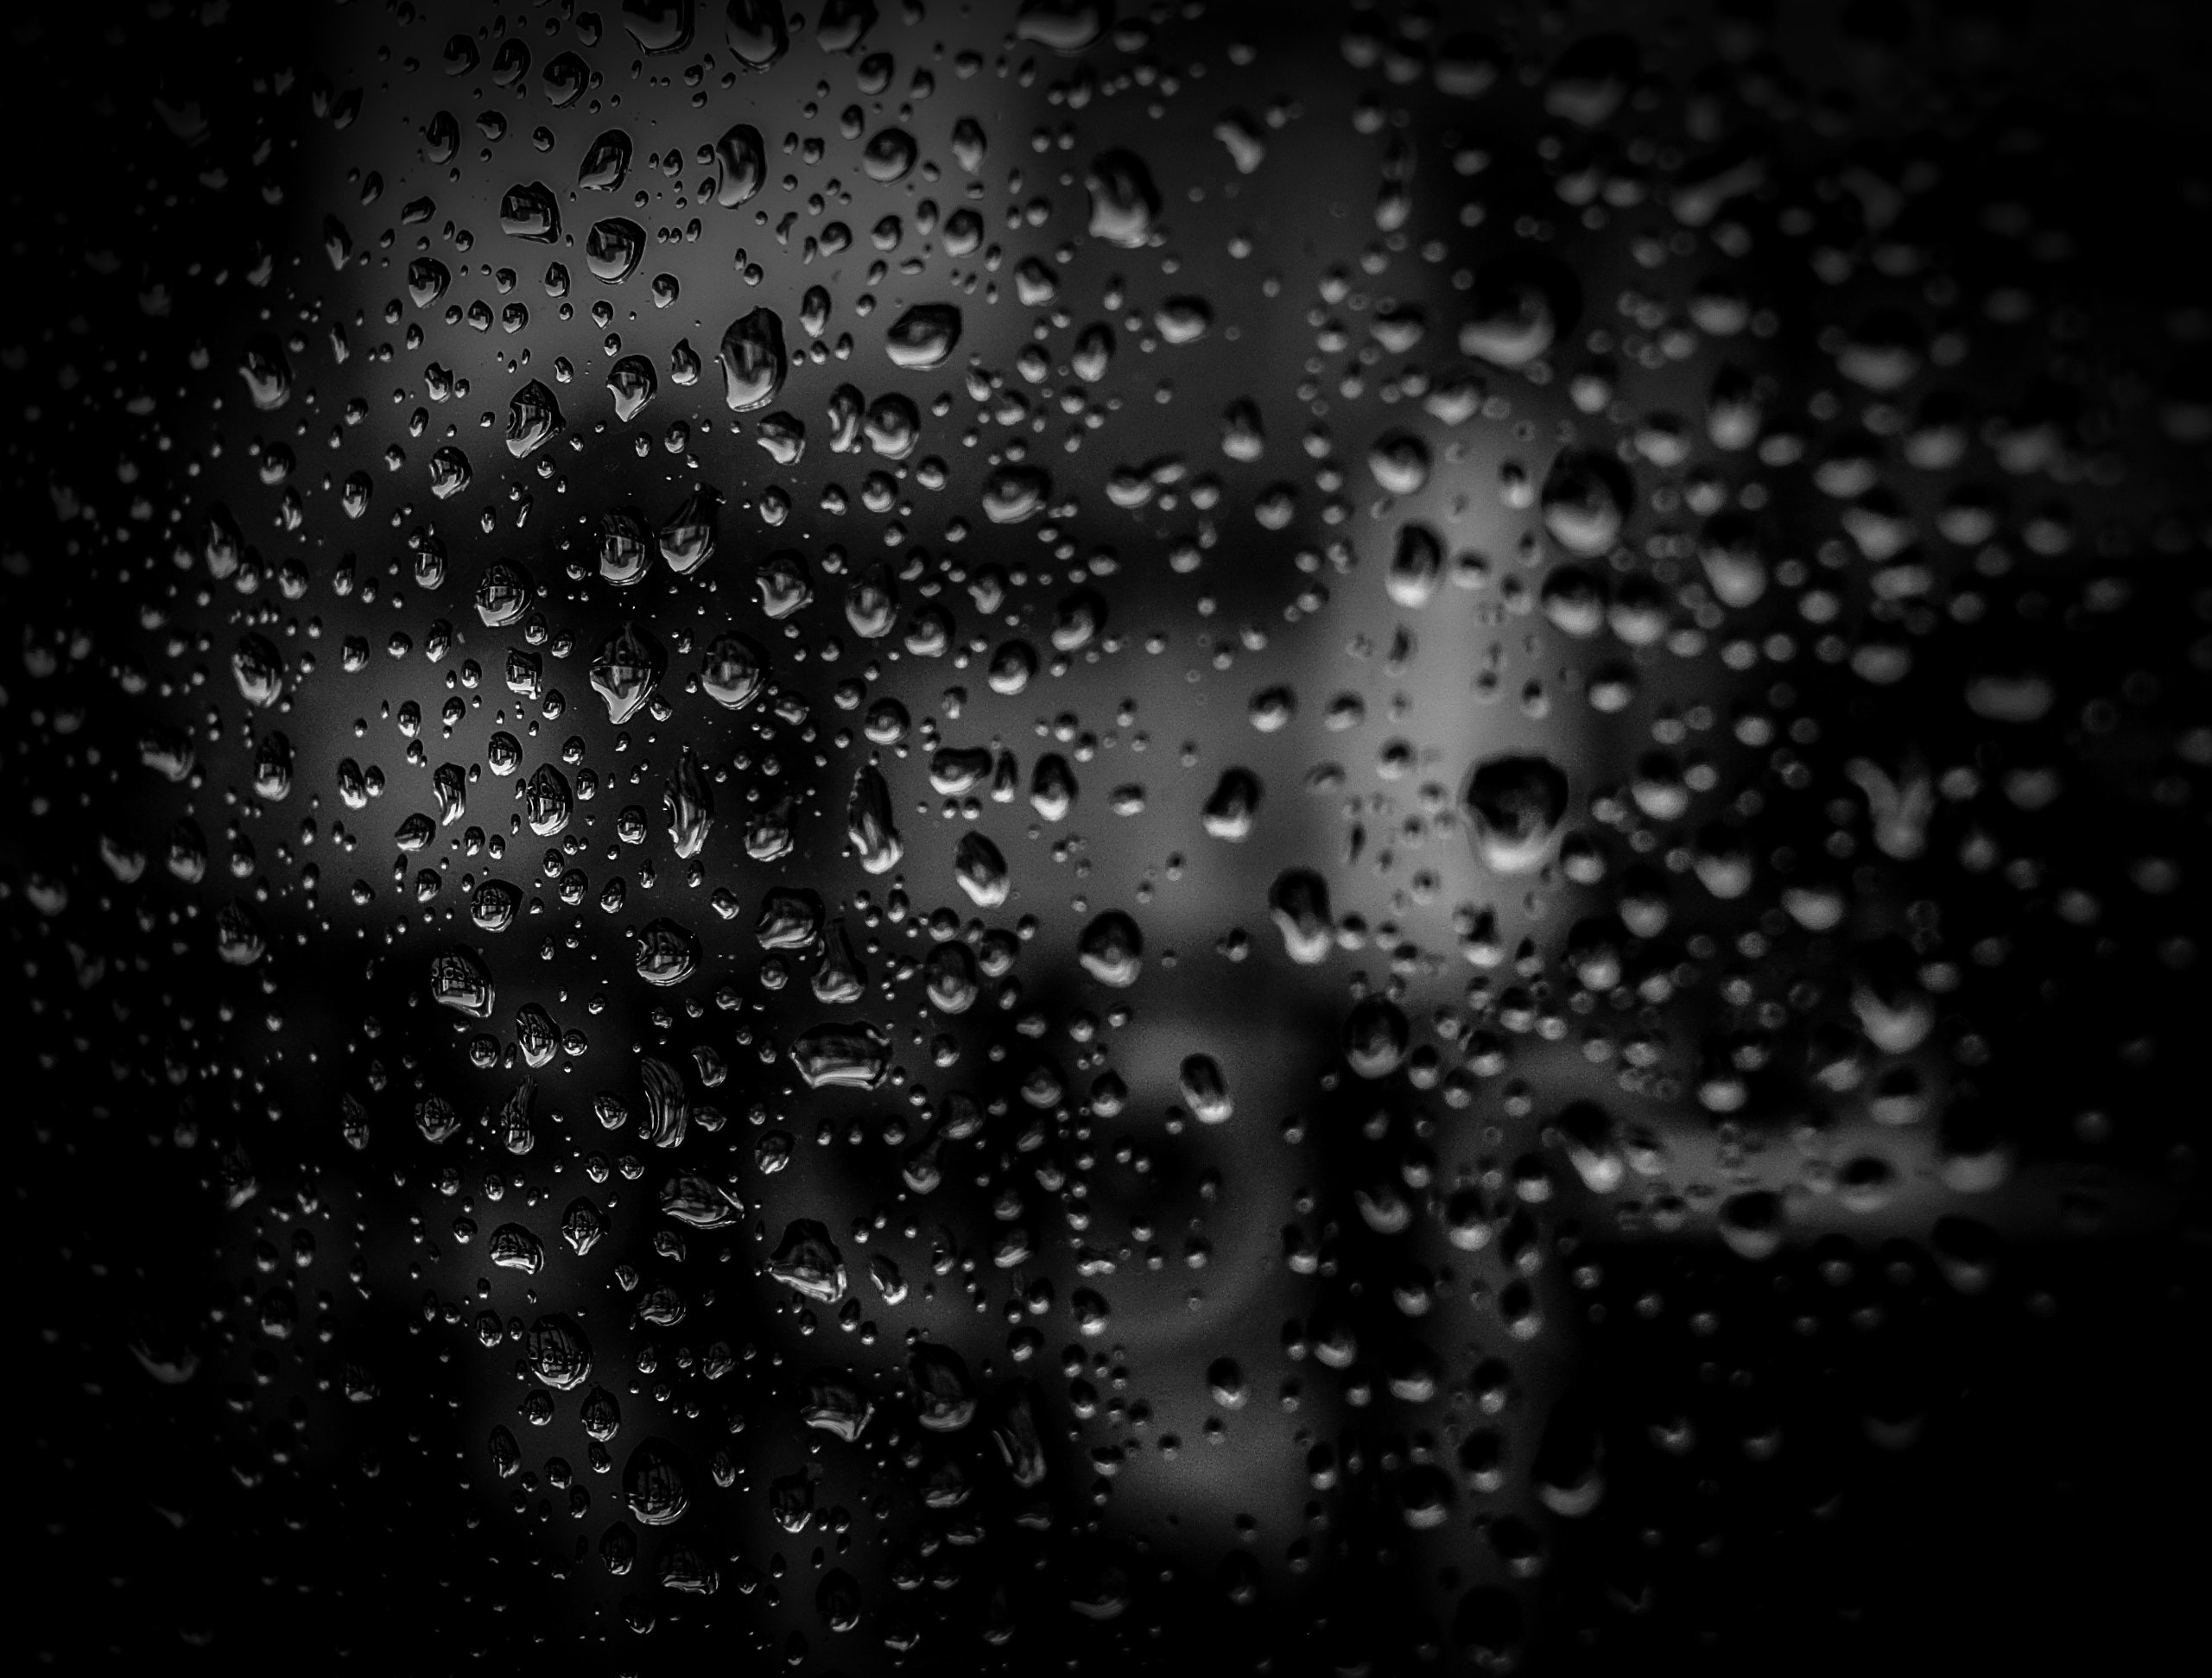 2561x1943, We Have A Great Selection Af Black Wallpapers - Black And White Rain Drops - HD Wallpaper 